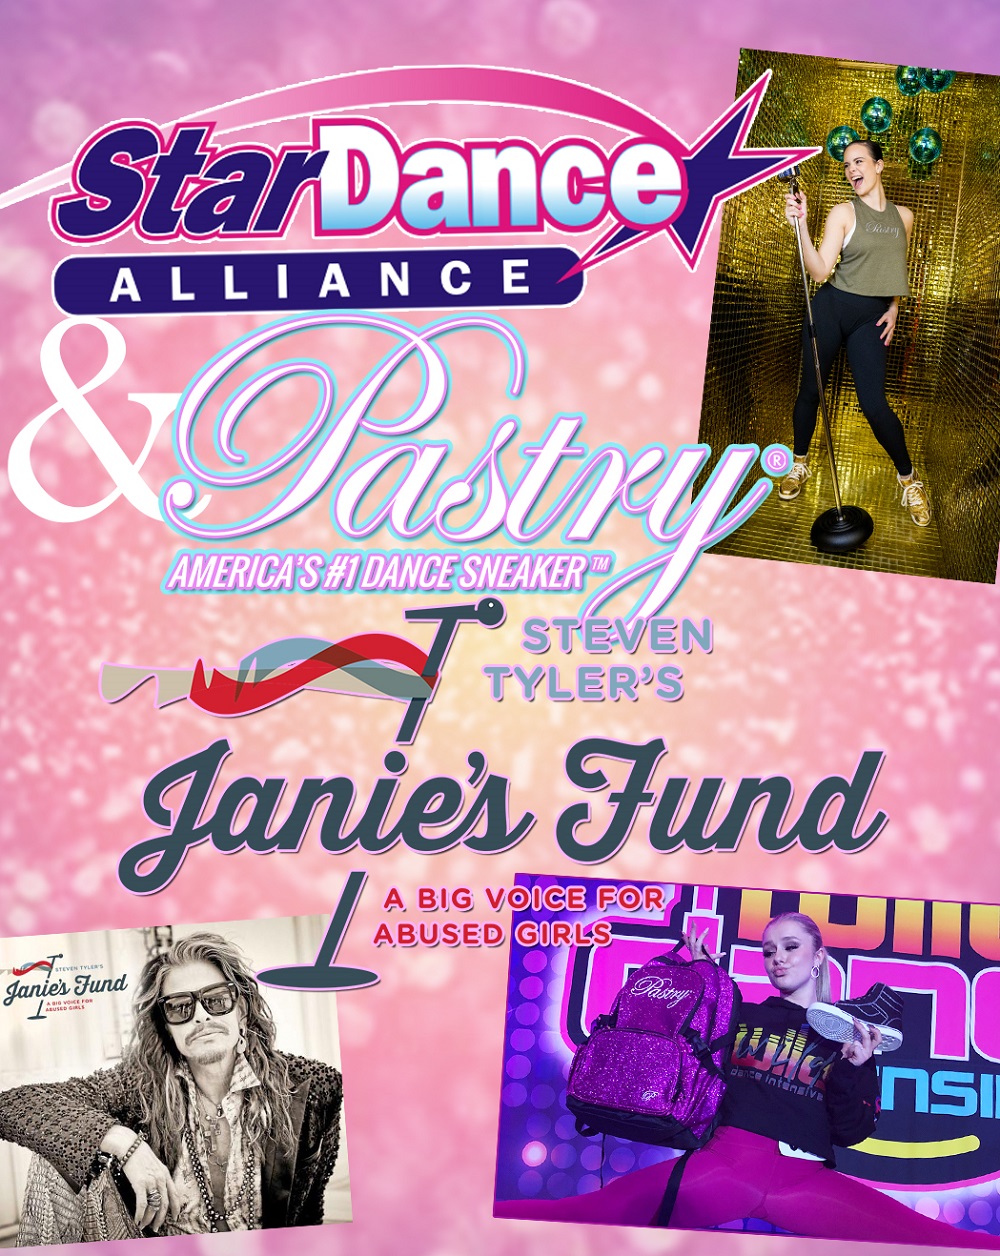 Star Dance Alliance and Pastry Sneaker Announce New Partnership